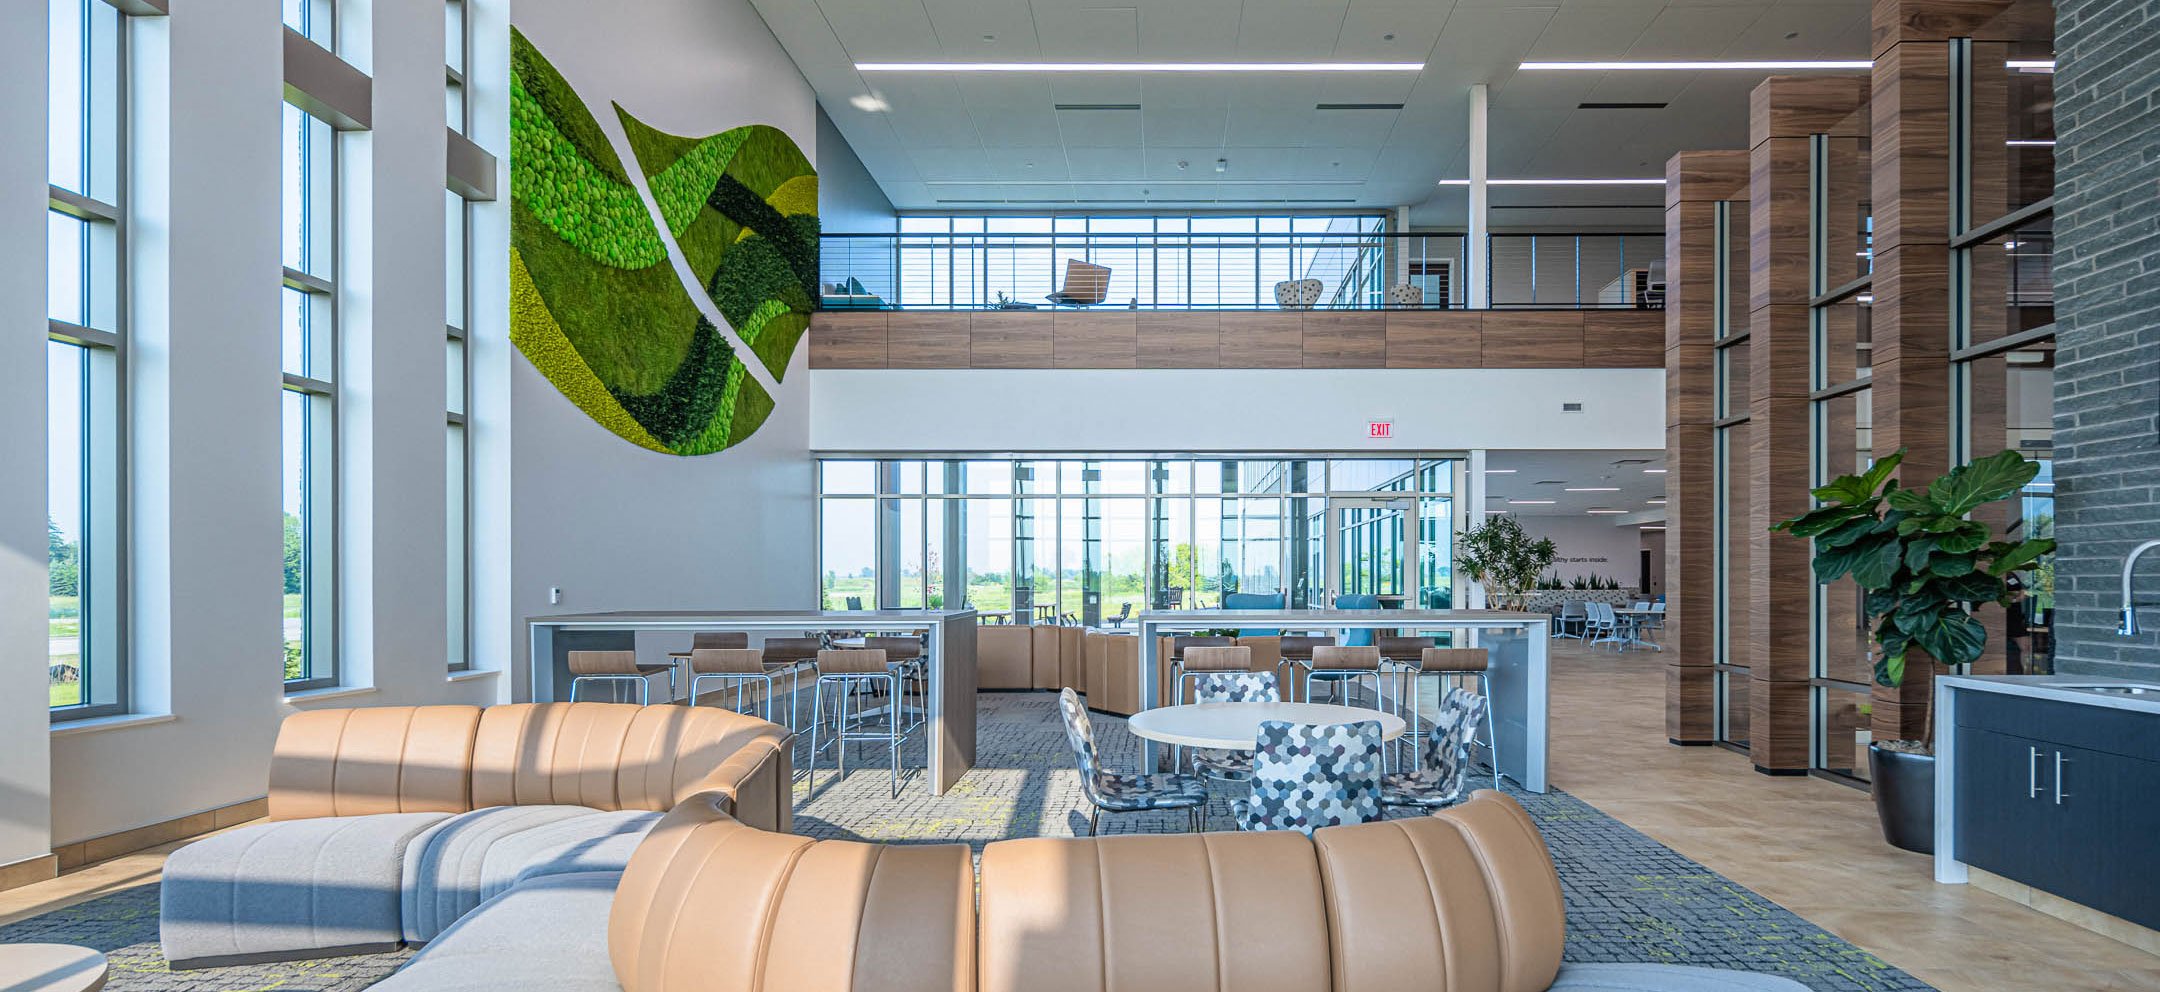 Lobby of Nature's Way new corporate office facility constructed by C.D. Smith Construction firm